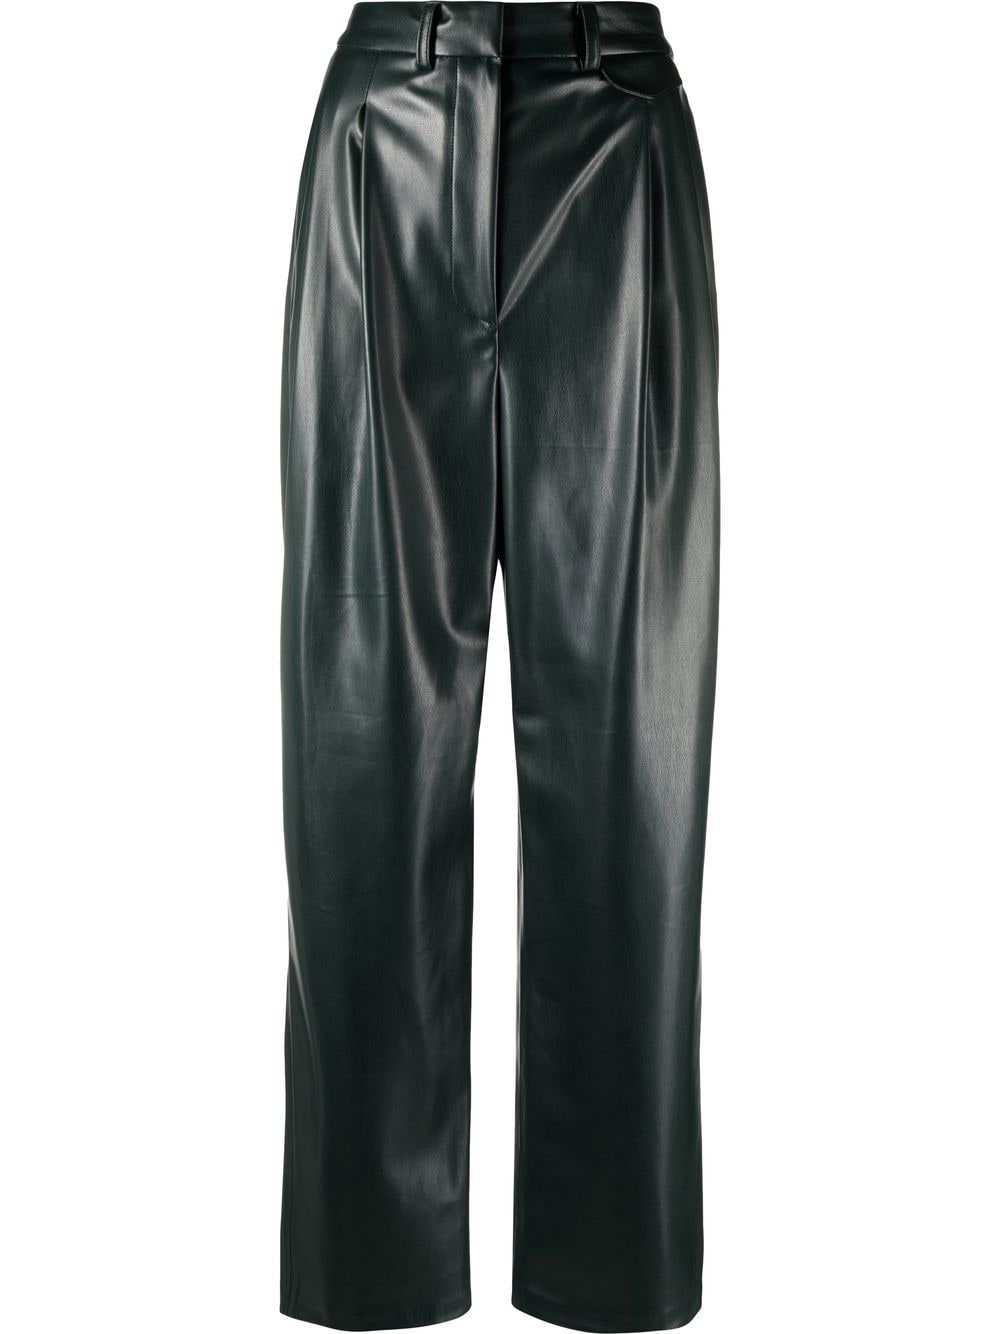 Frankie Shop Pernille faux-leather trousers - Green